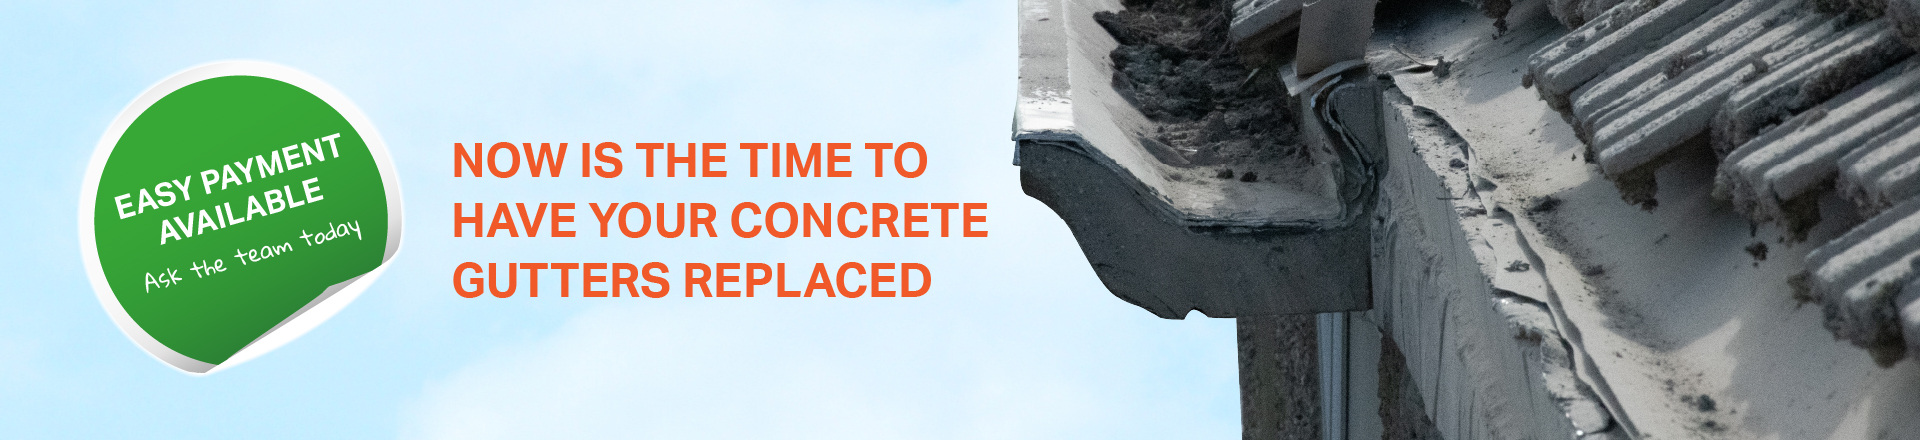 Now is the time to get your concrete guttering replaced.